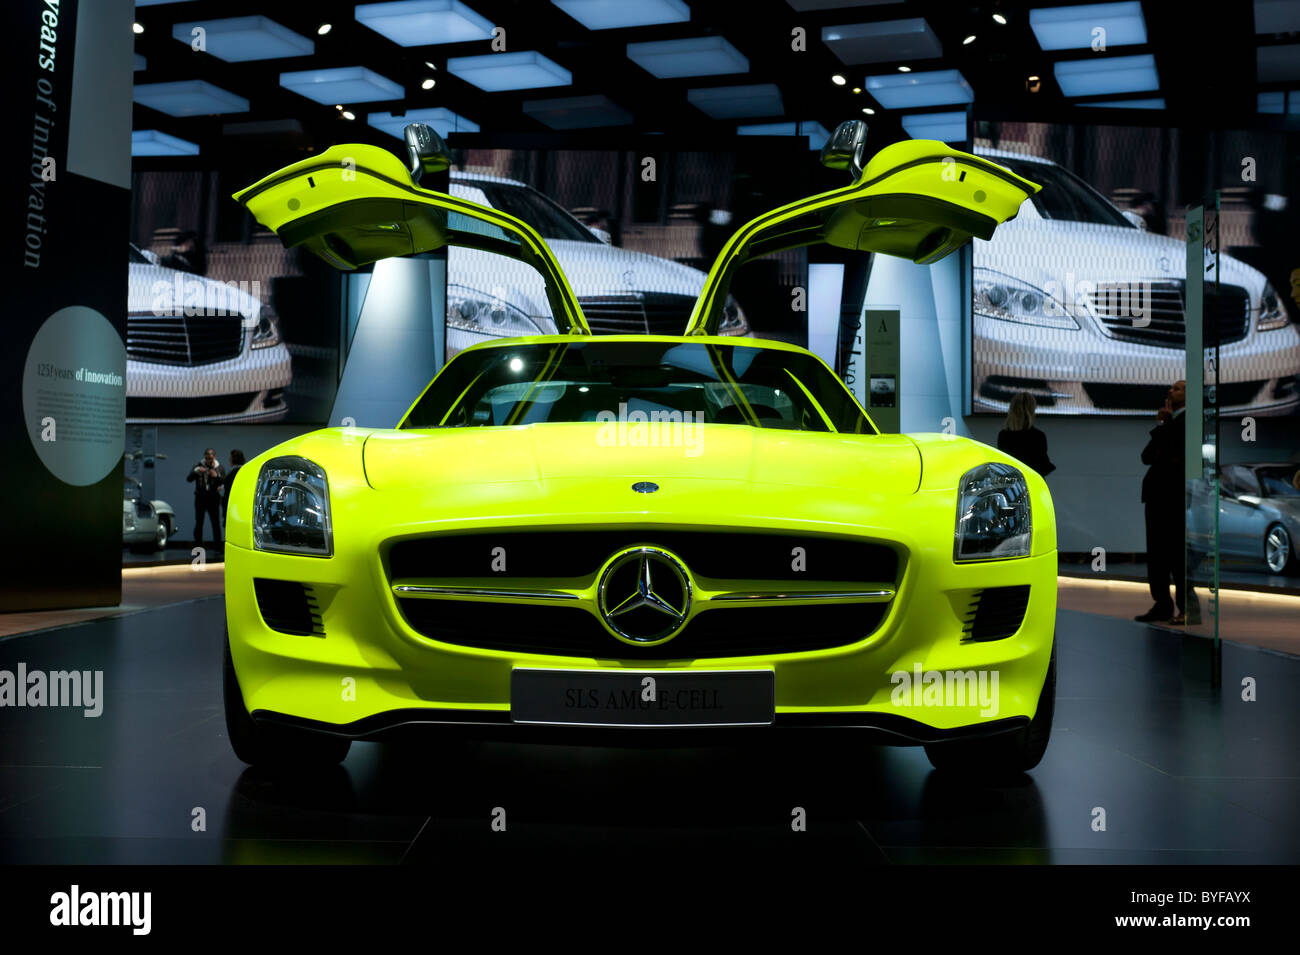 Mercedes-Benz SLS AMG E-Cell electric sports car at the 2011 North American International Auto Show in Detroit Stock Photo